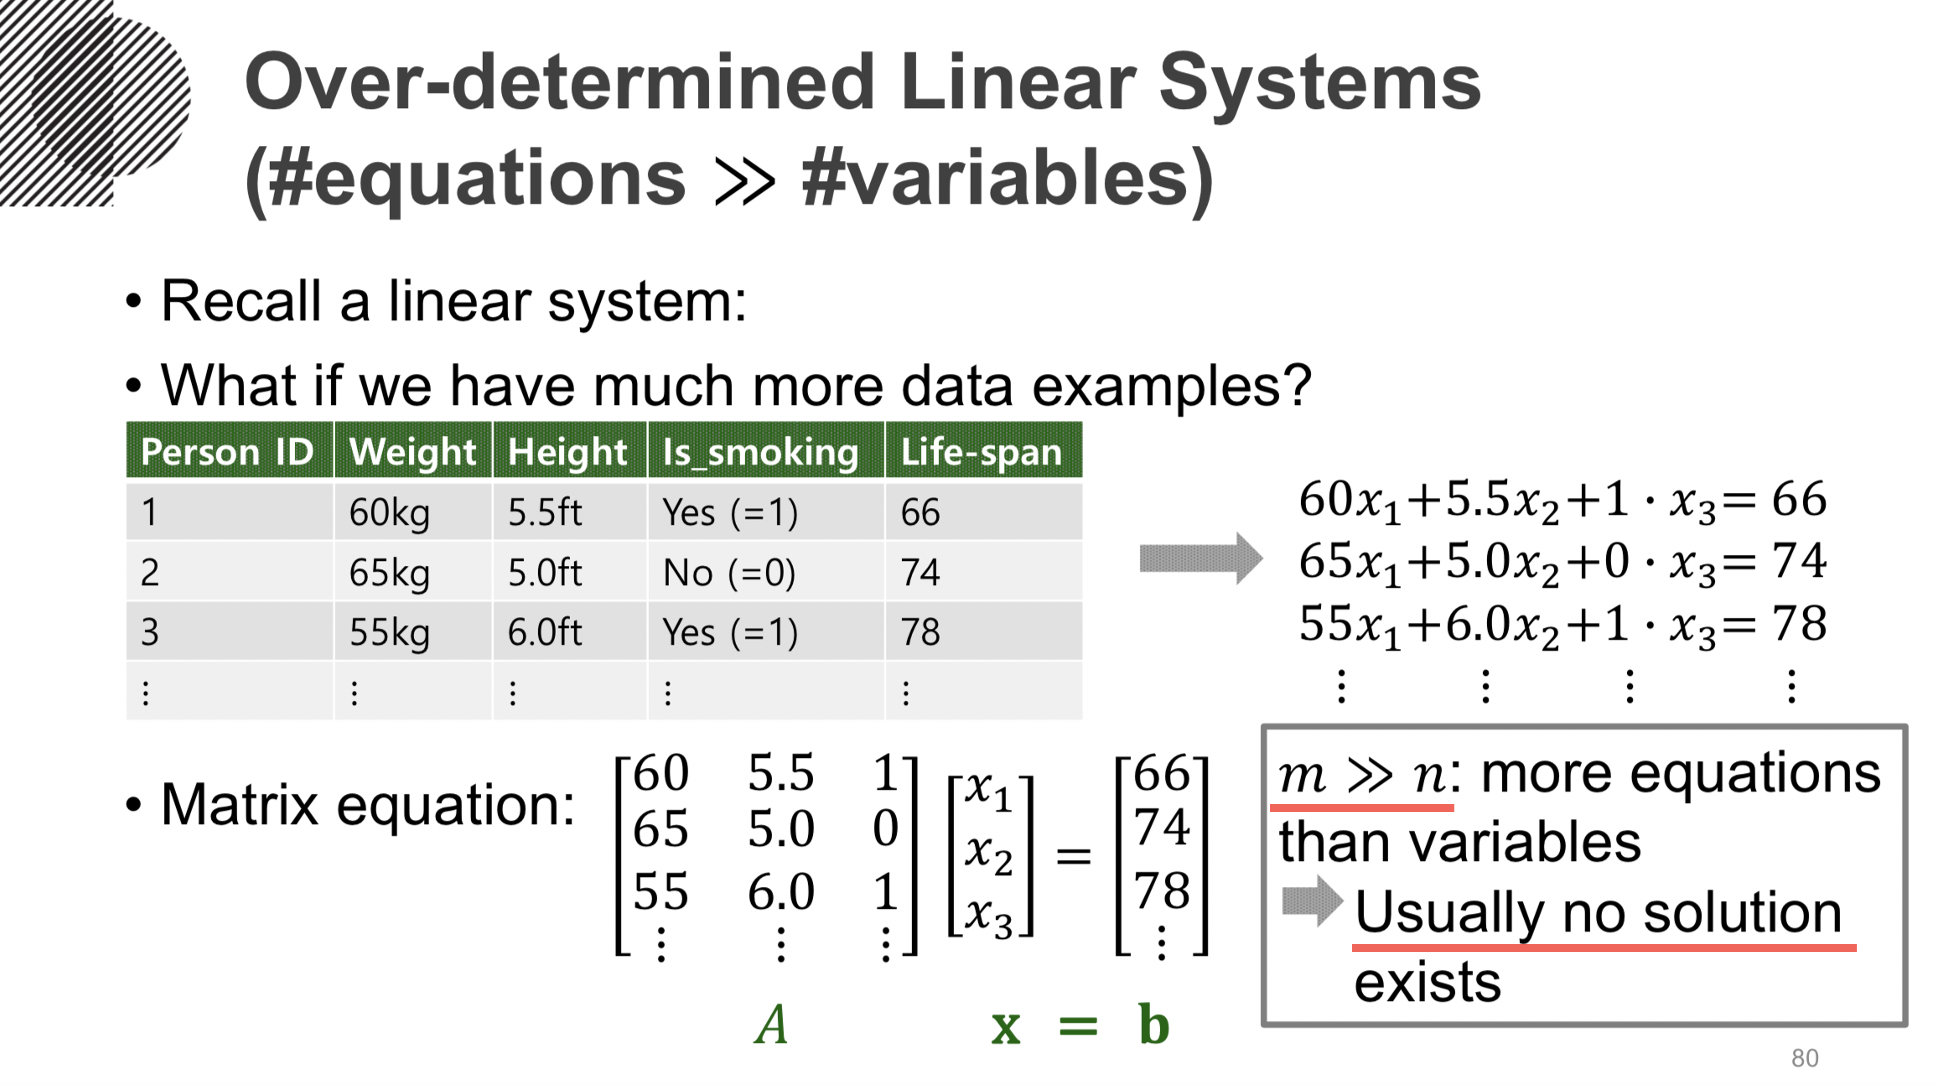 Over-determined Linear Systems